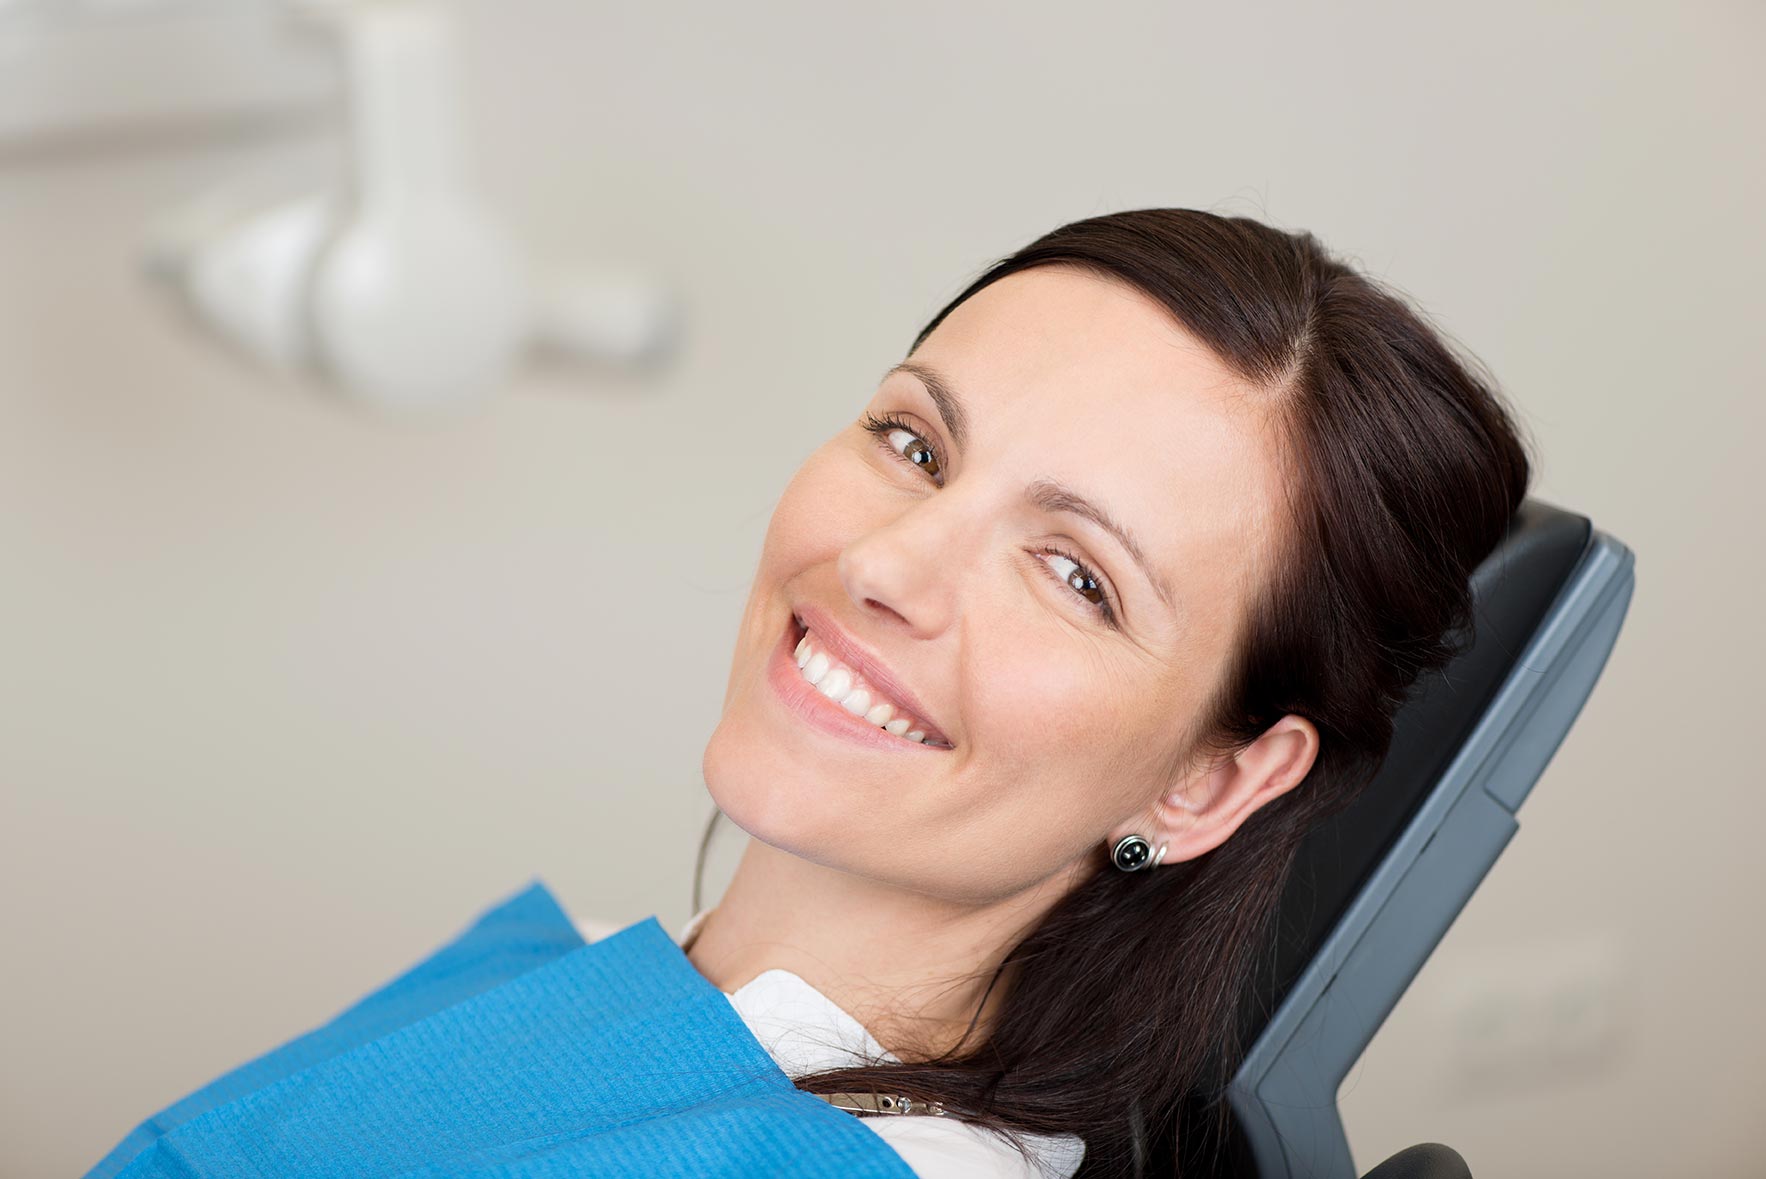 A woman sits in the dentist chair, comfortably awaiting care.